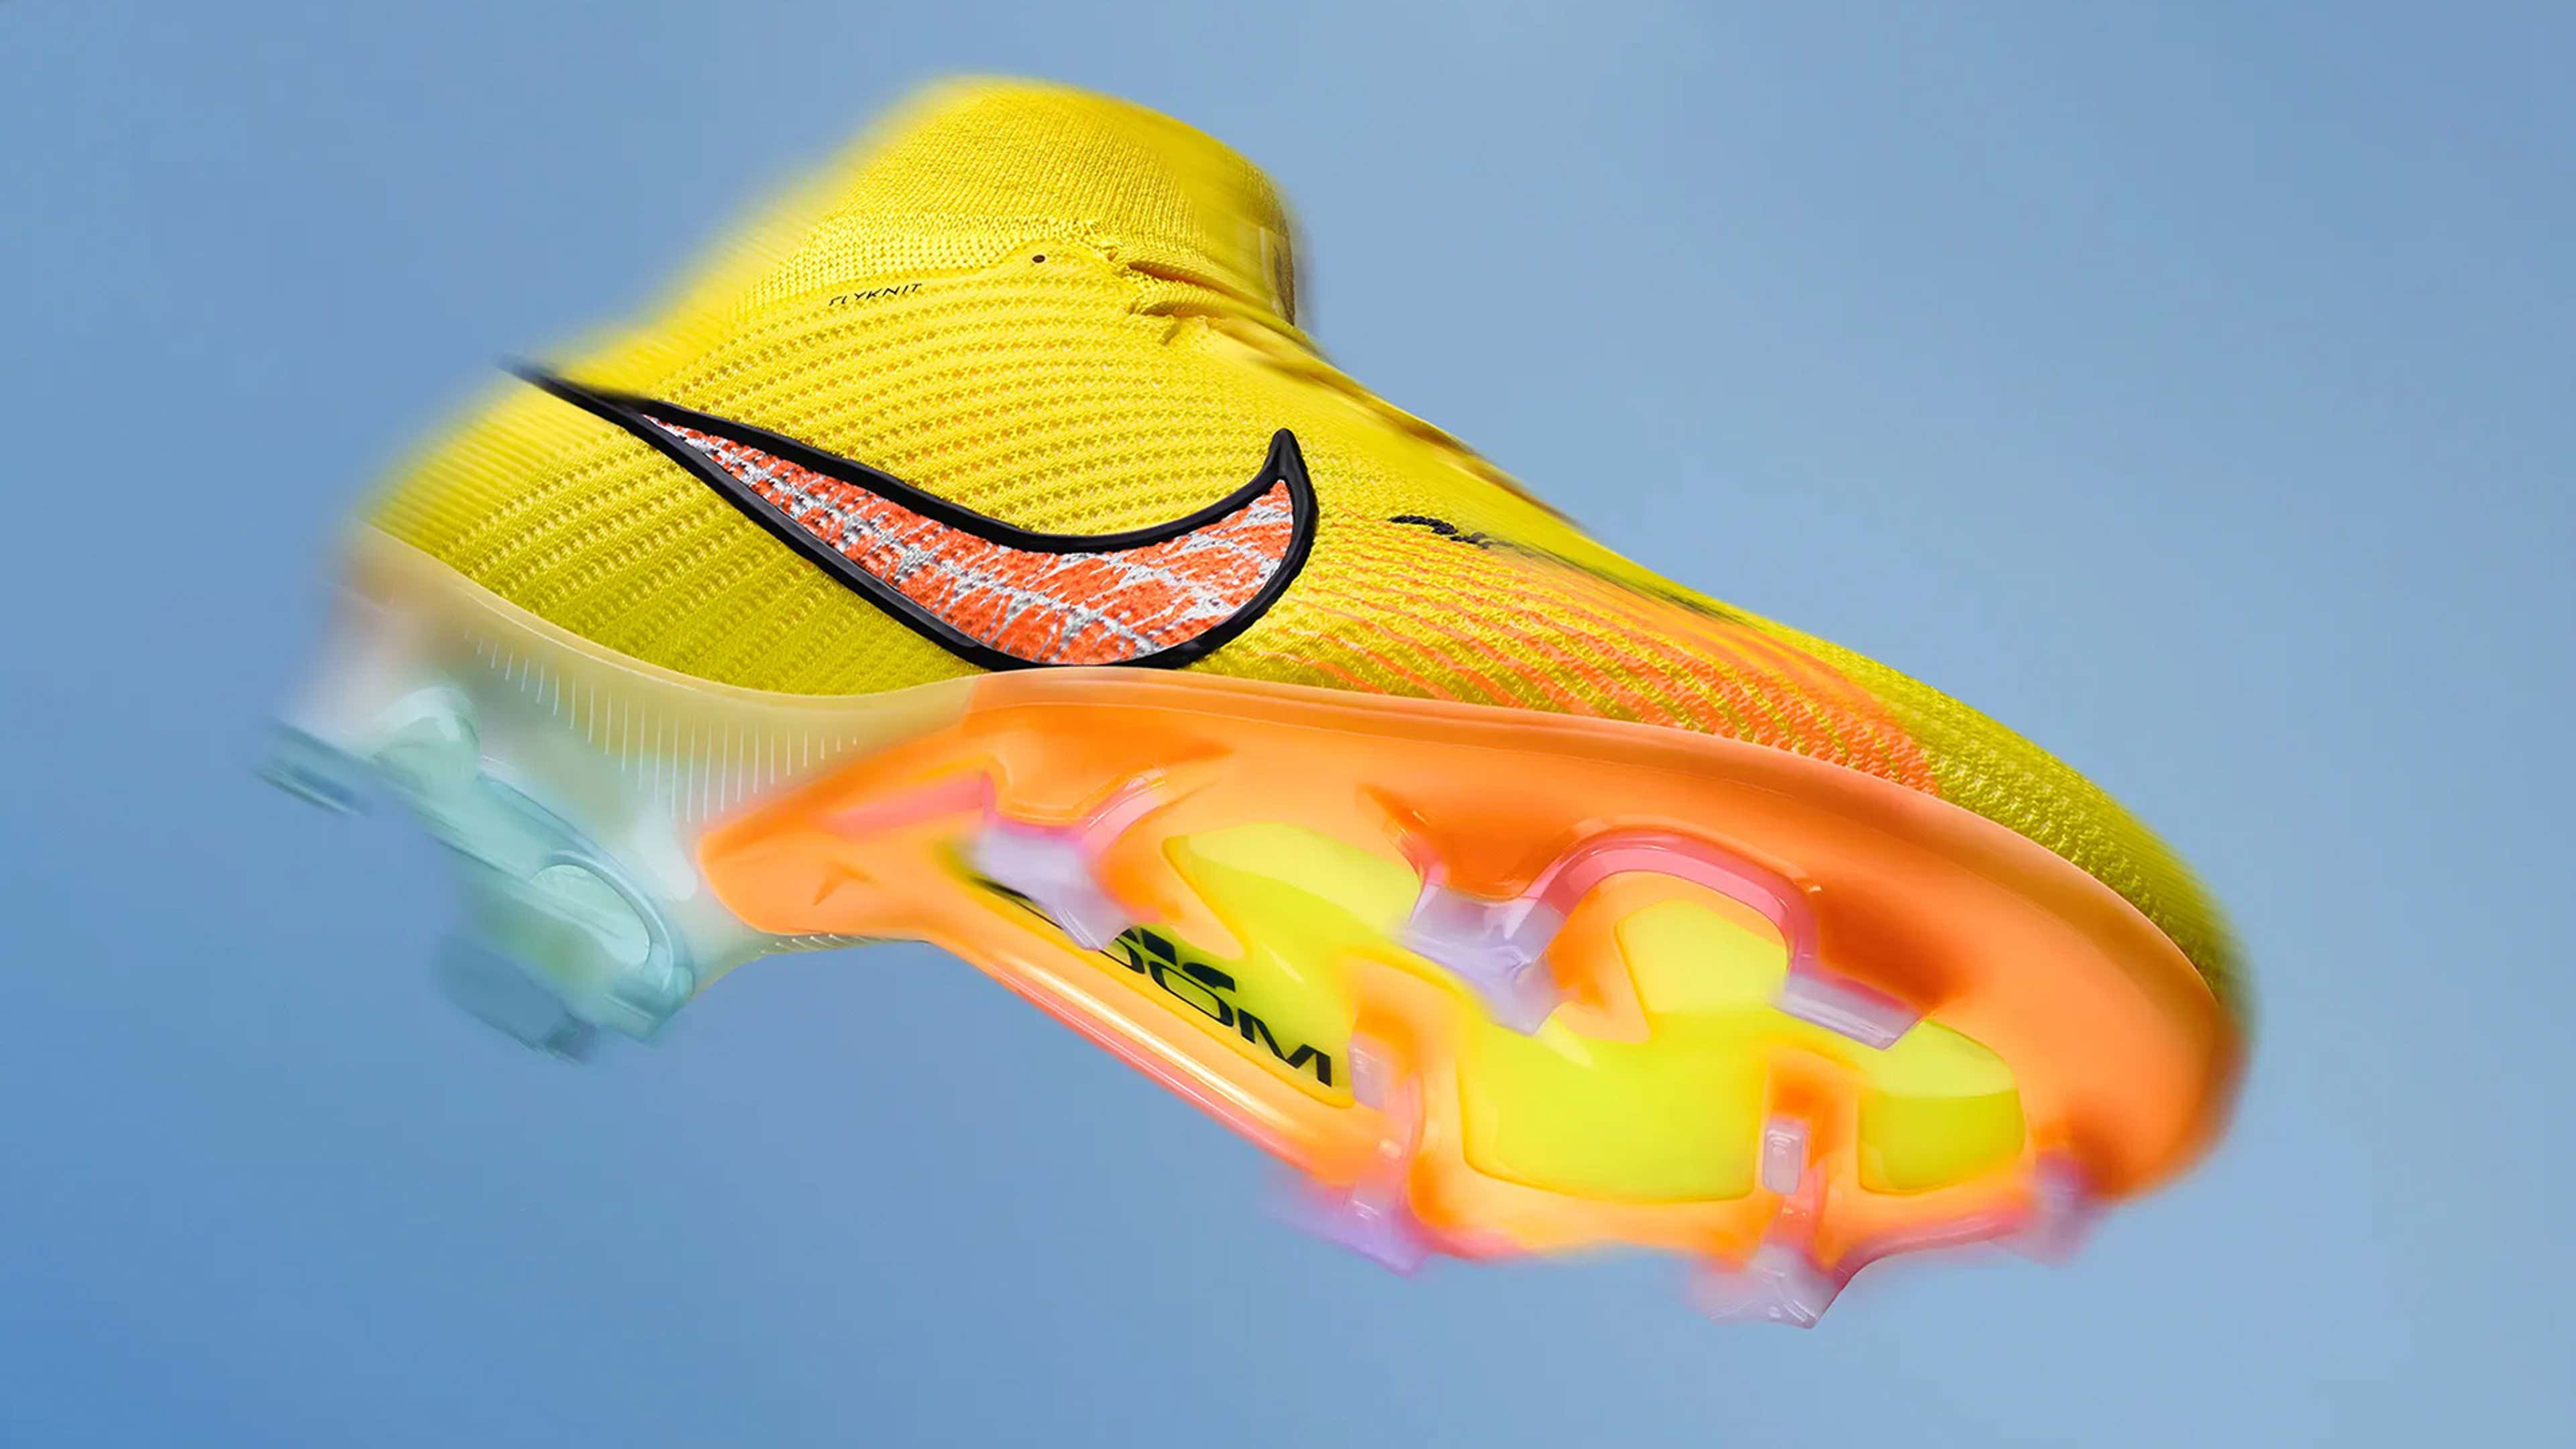 yellow high top superfly 2022